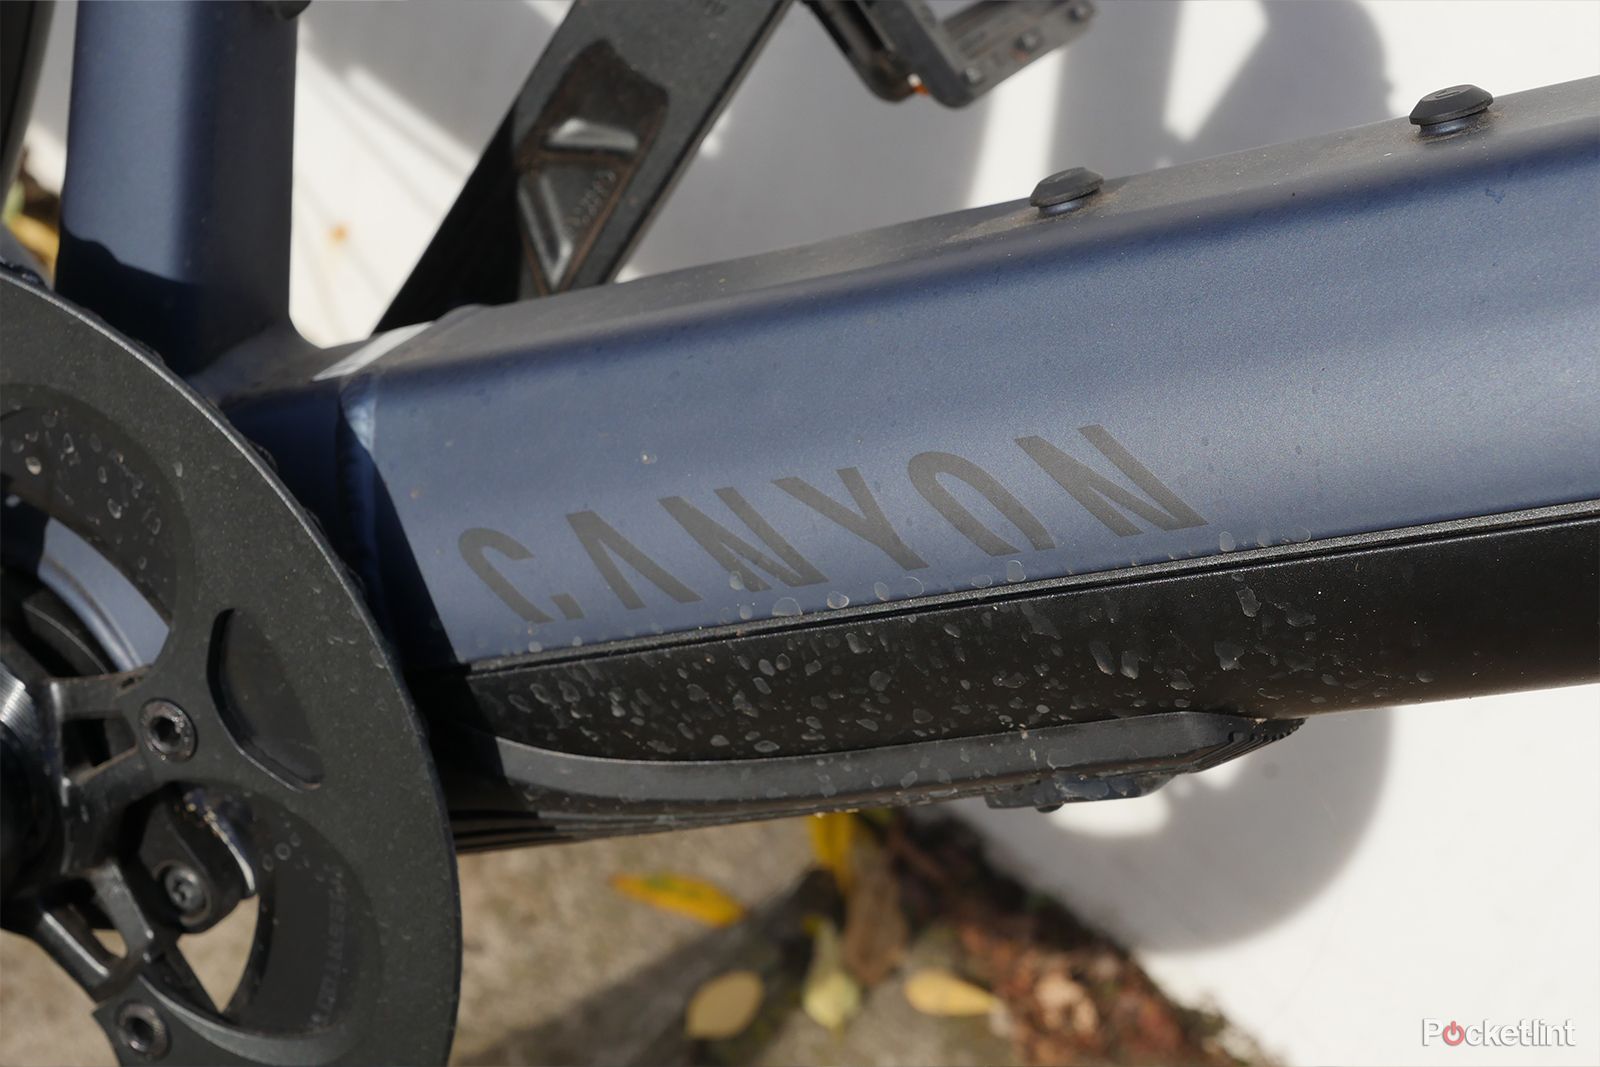 Canyon Commuter:On 7 review: Sleek and speedy photo 8